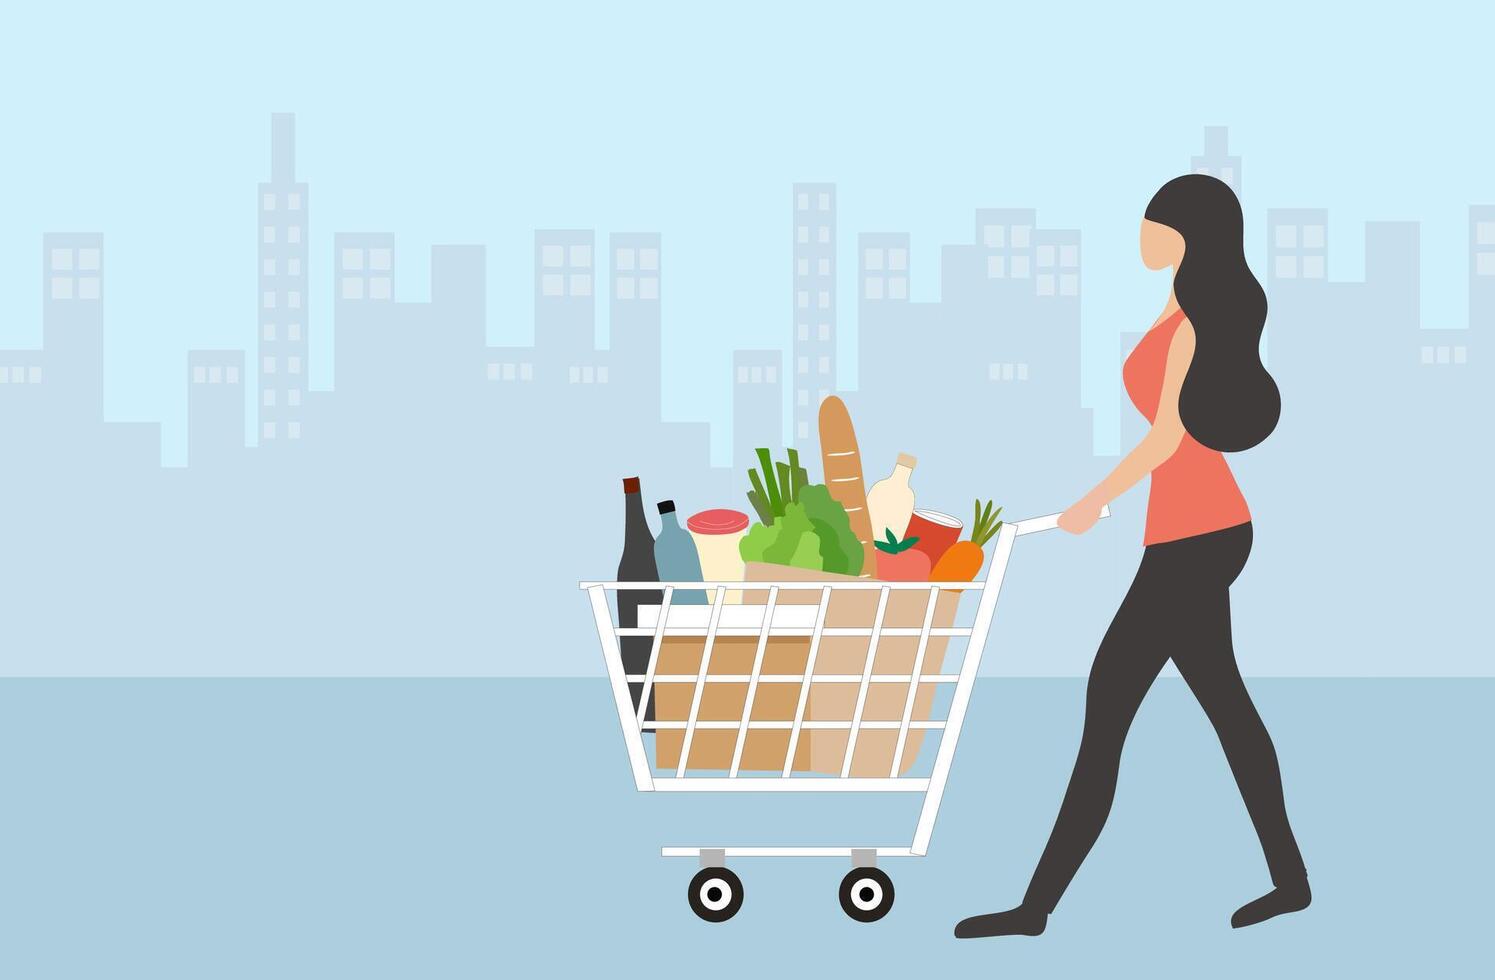 Grocery shopping, womanm with shopping cart from supermarket vector illustration